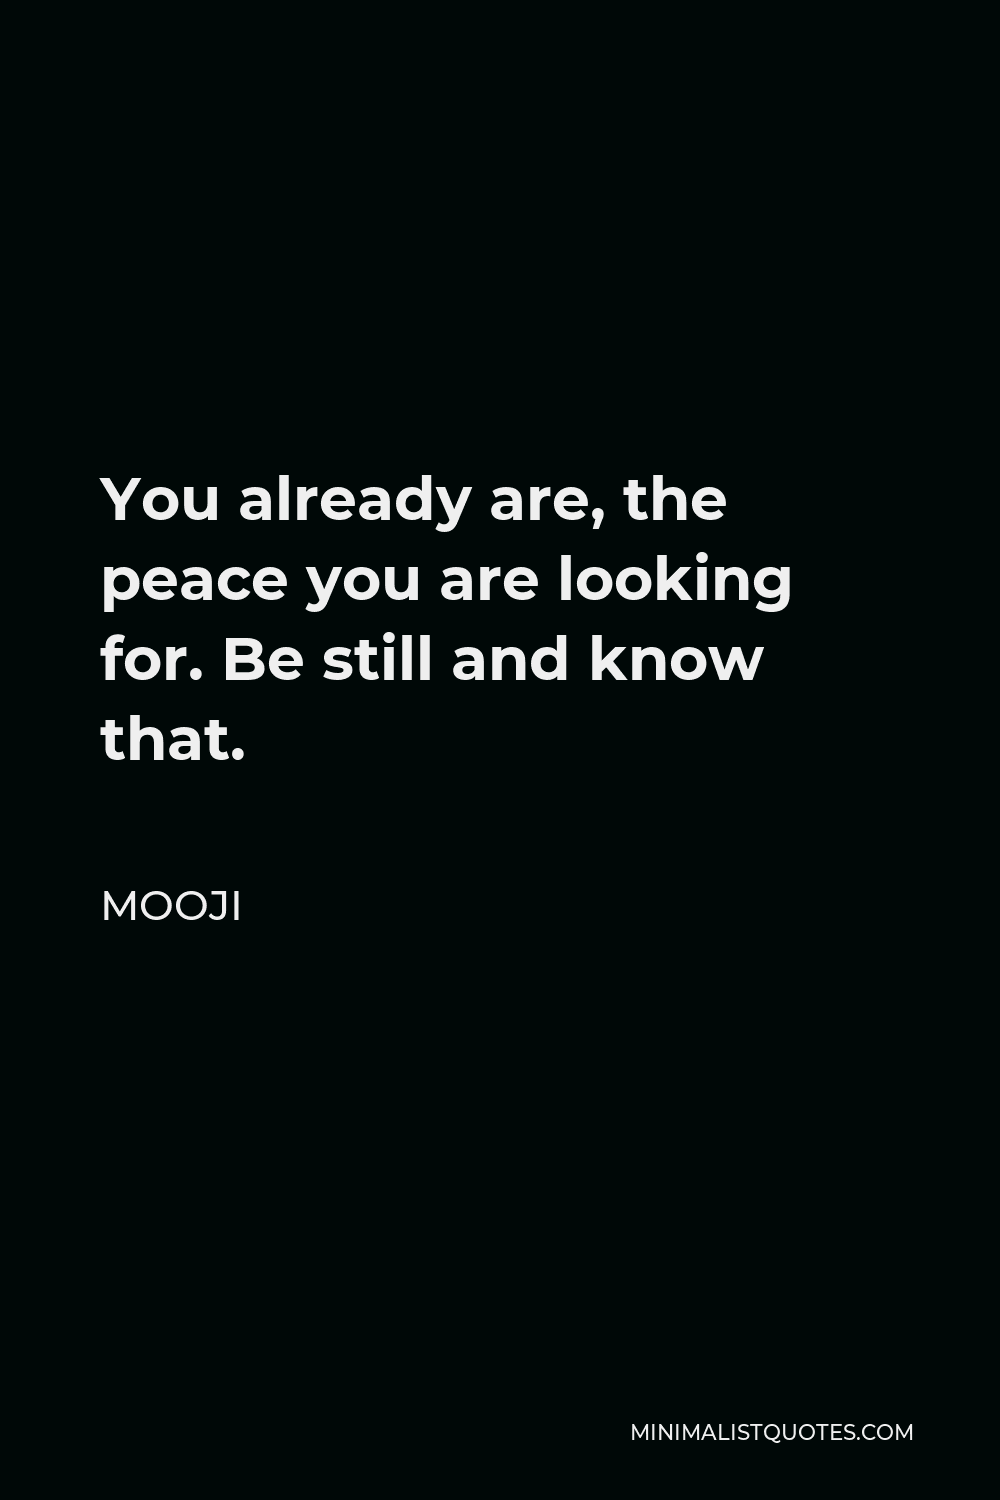 Mooji Quote - You already are, the peace you are looking for. Be still and know that.